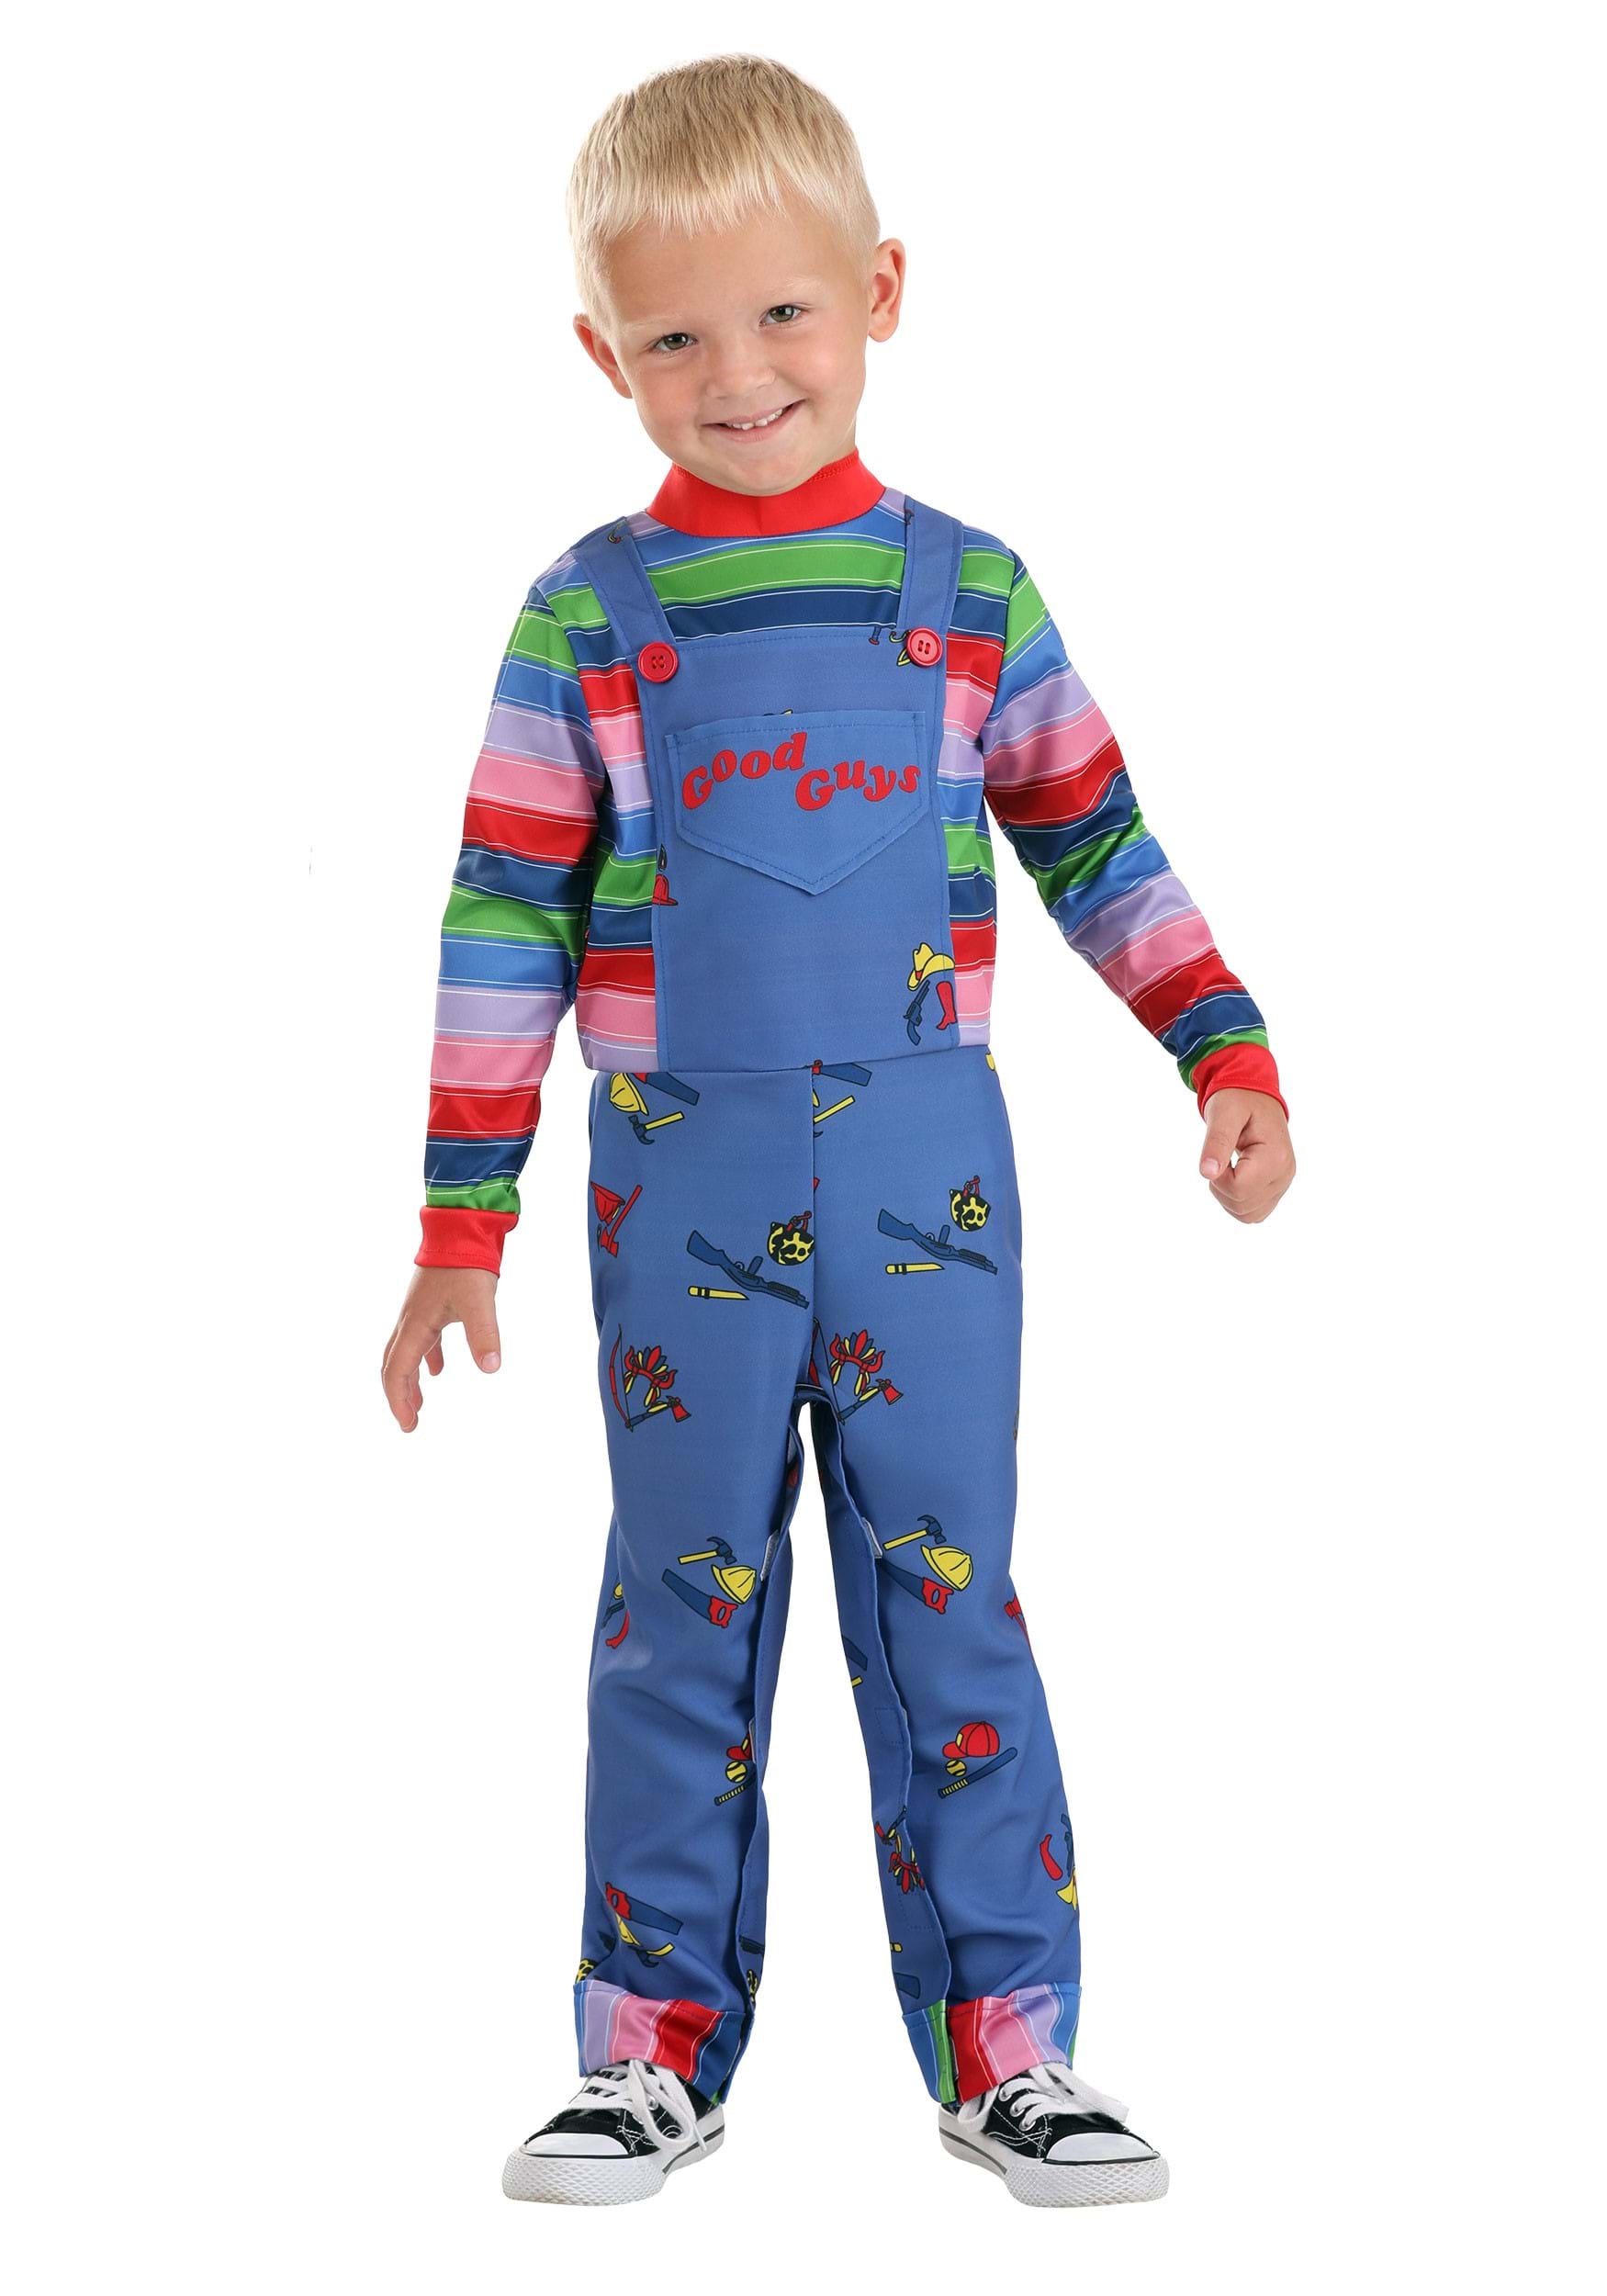 Childs Play Chucky Costume for Toddlers